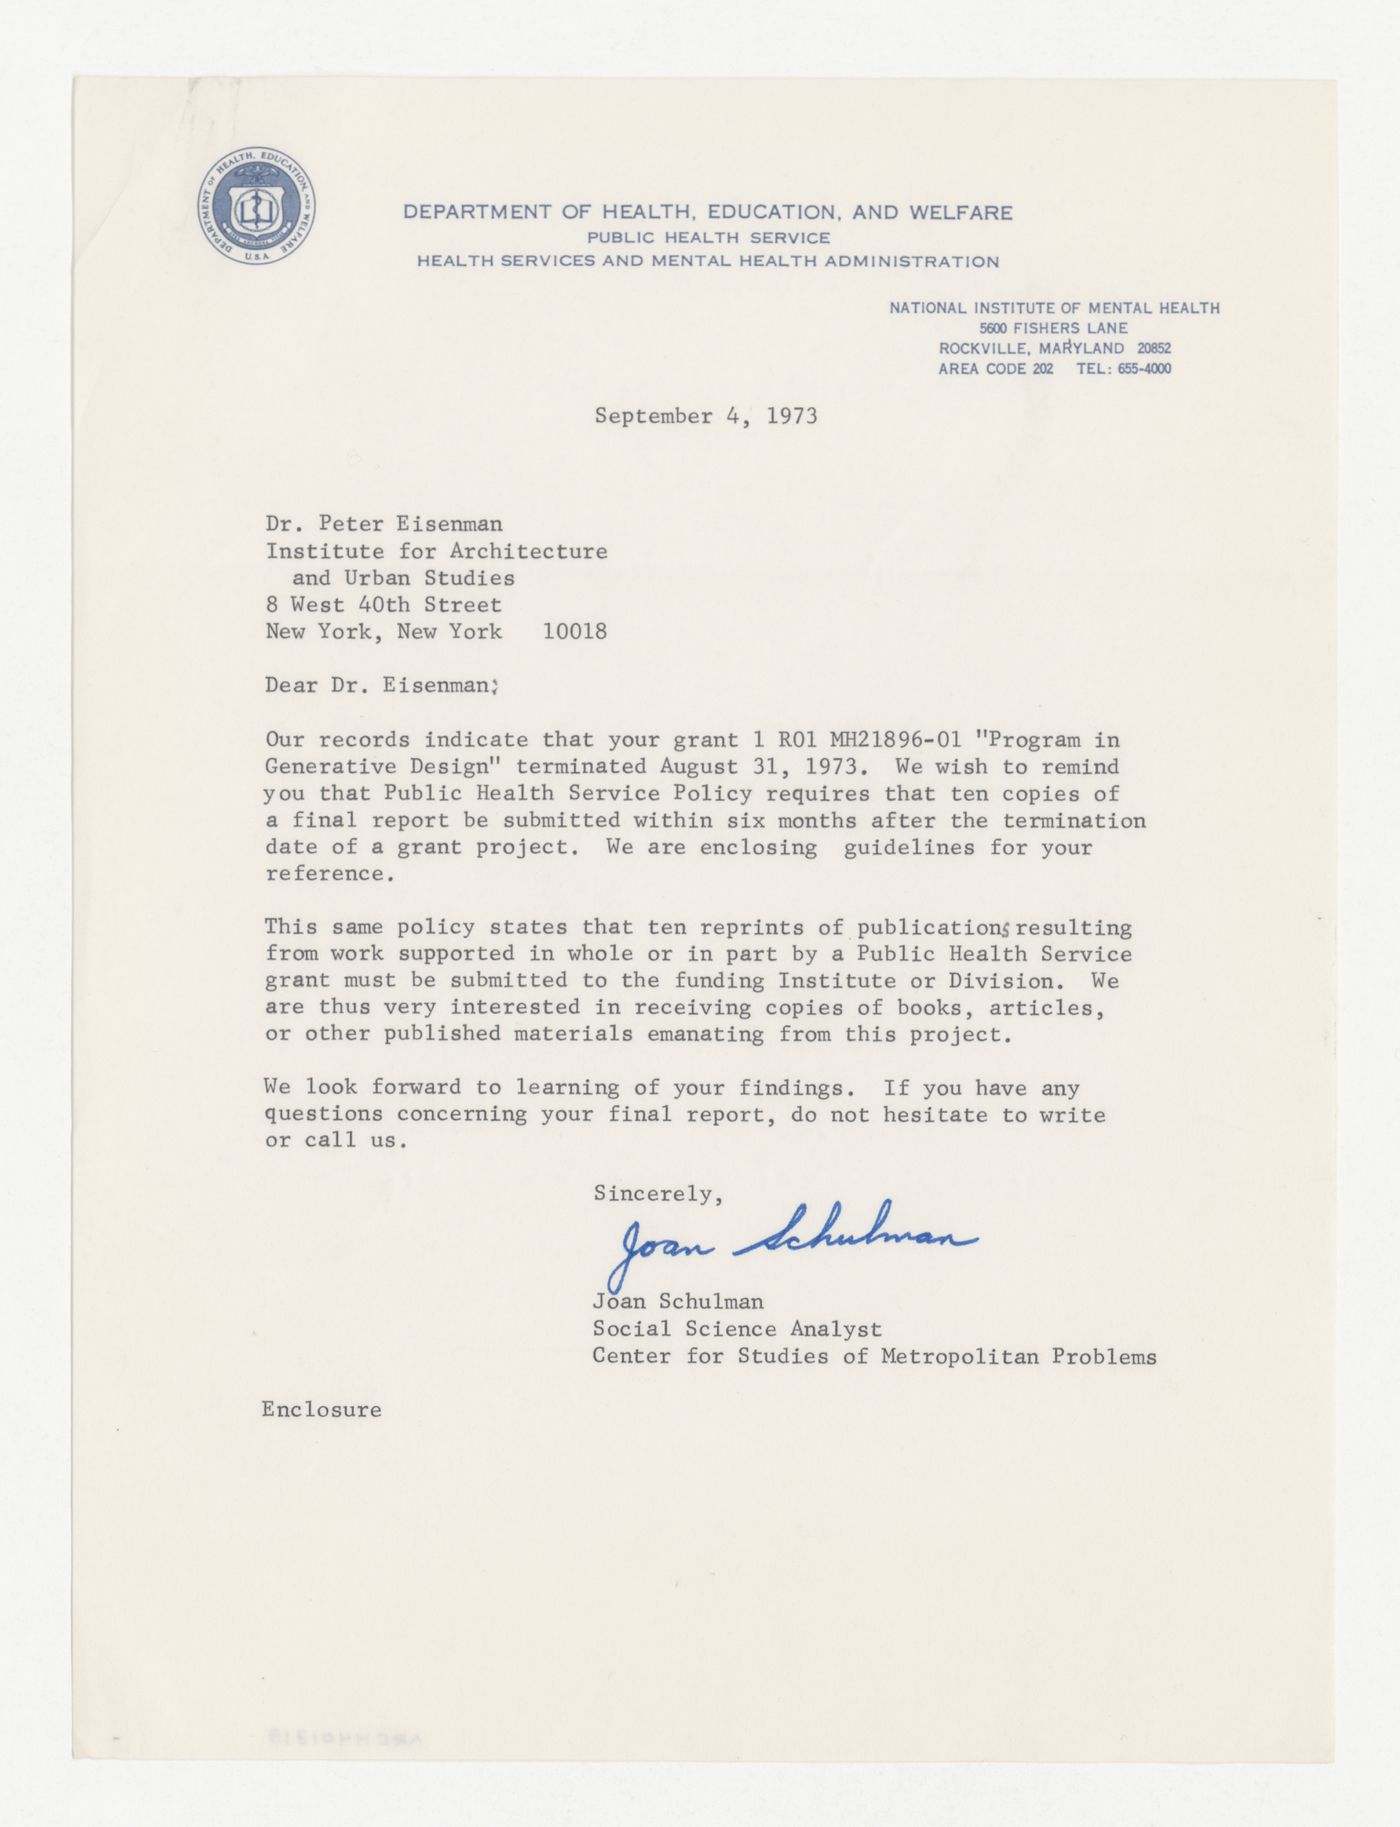 Letter from Joan Schulman to Peter D. Eisenman about report for grant for Program in Generative Design from the National Institute of Mental Health (NIMH) / Department of Health, Education, and Welfare